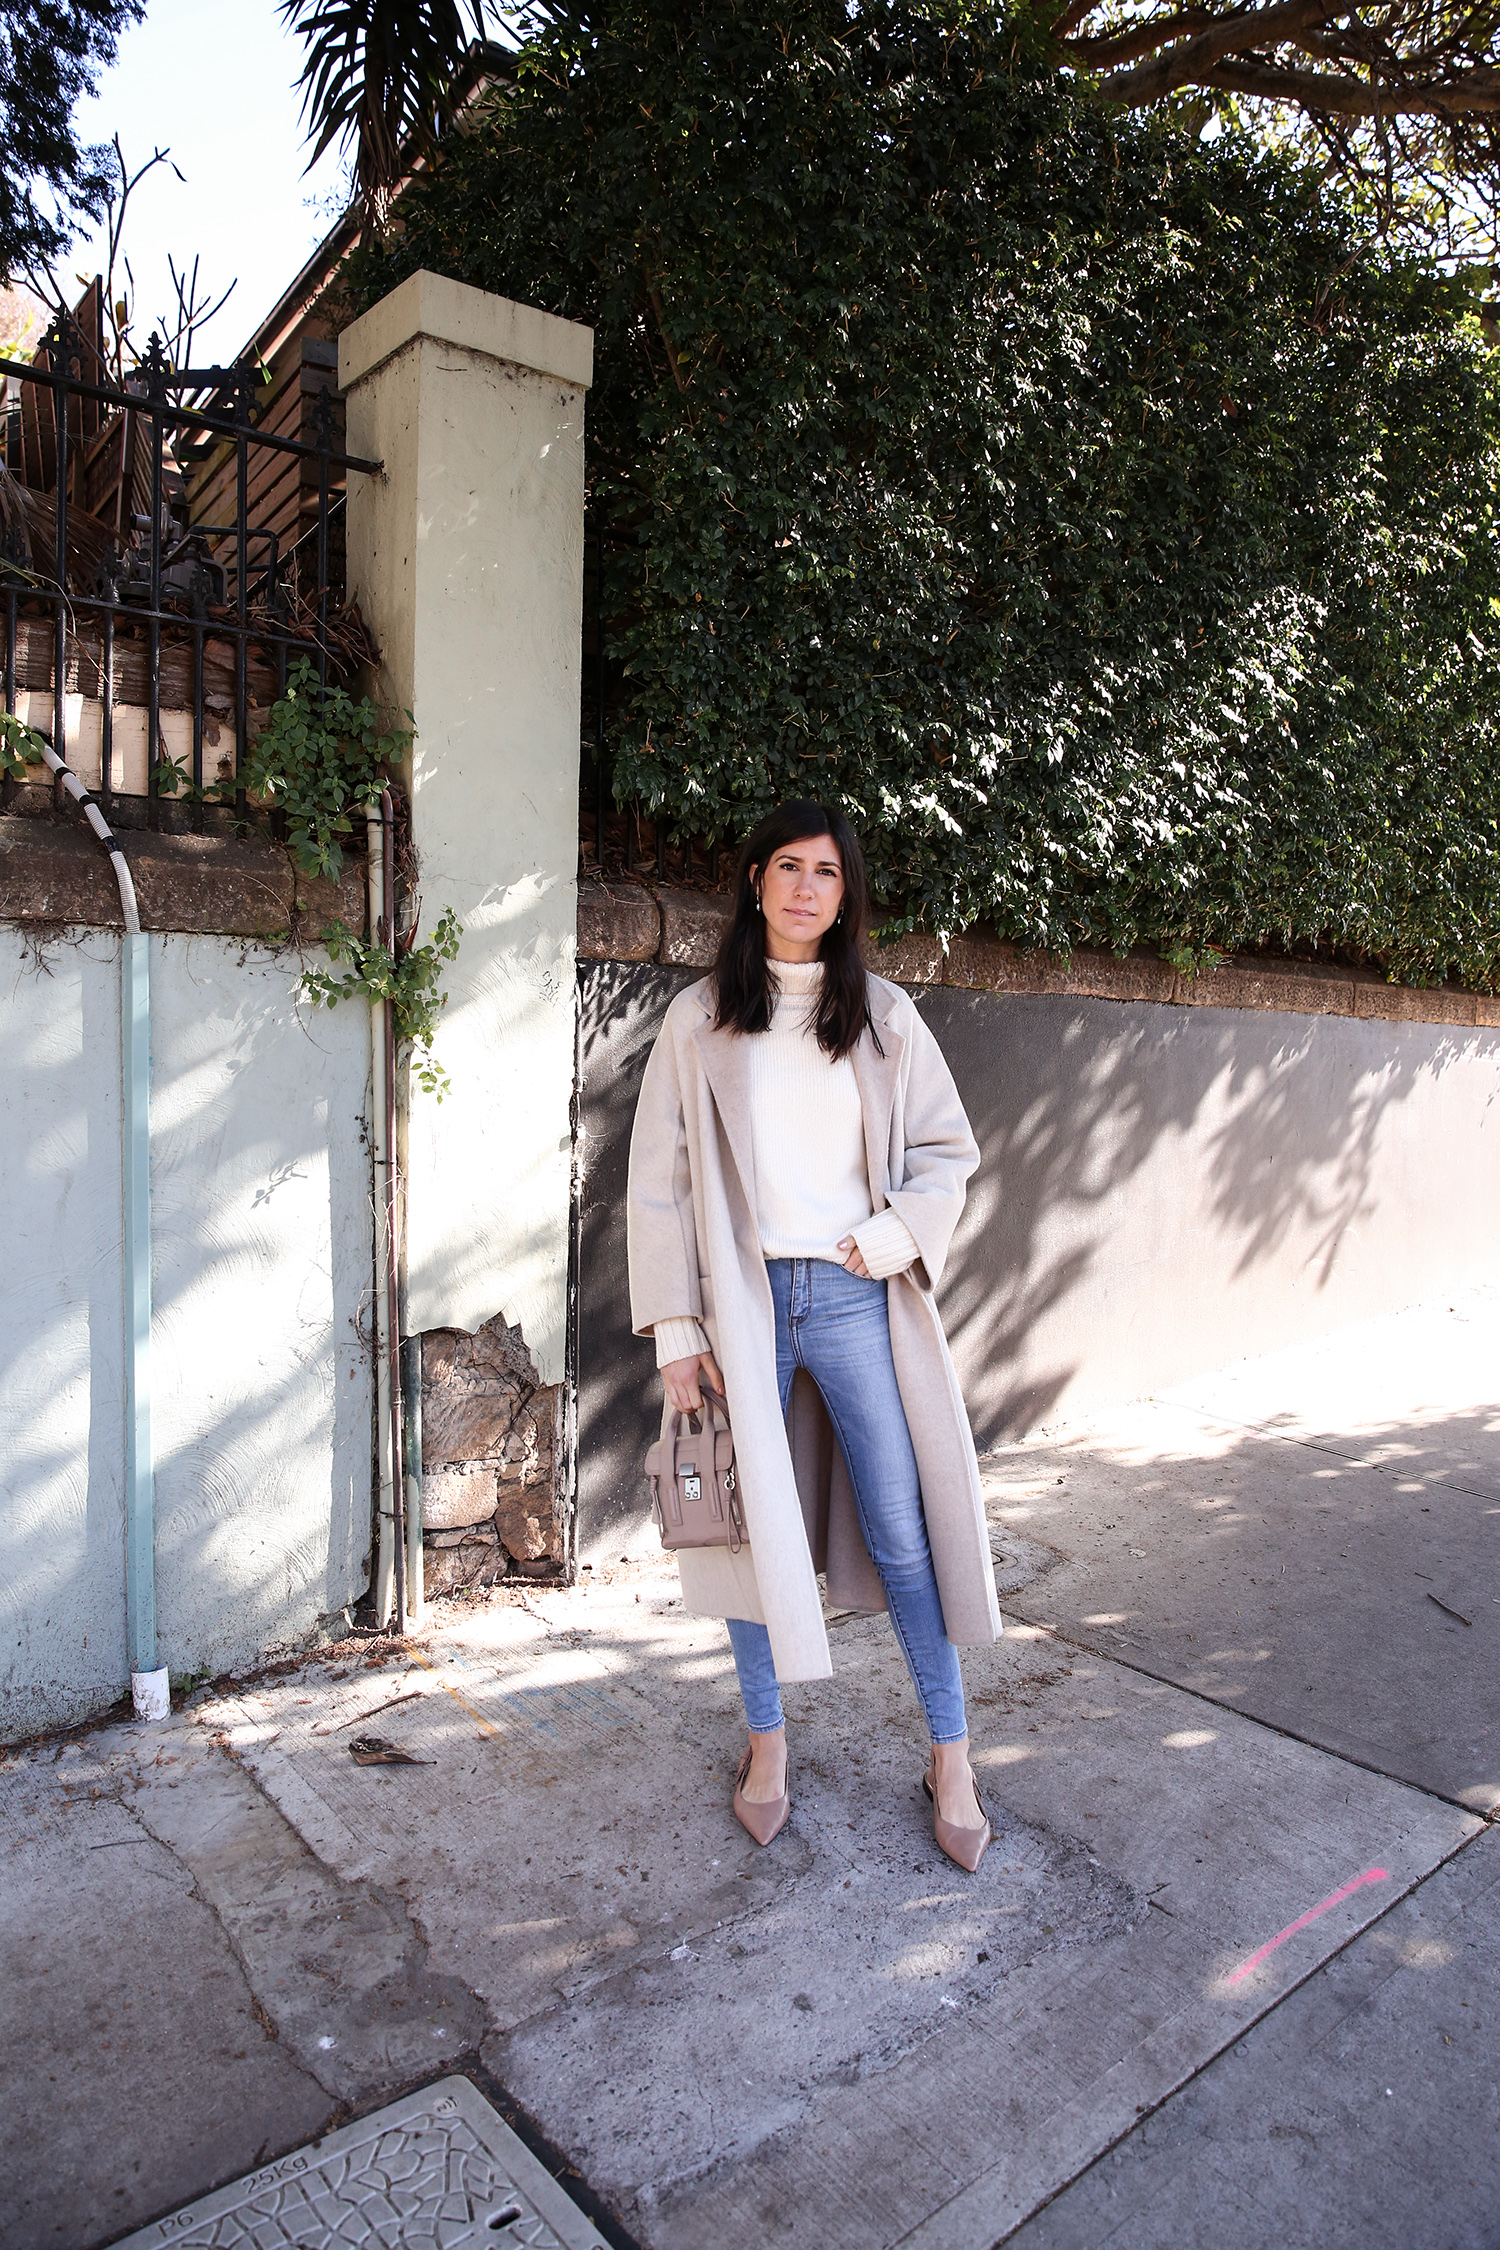 Wearing lately: Rollneck sweaters, skinny jeans & duster coats